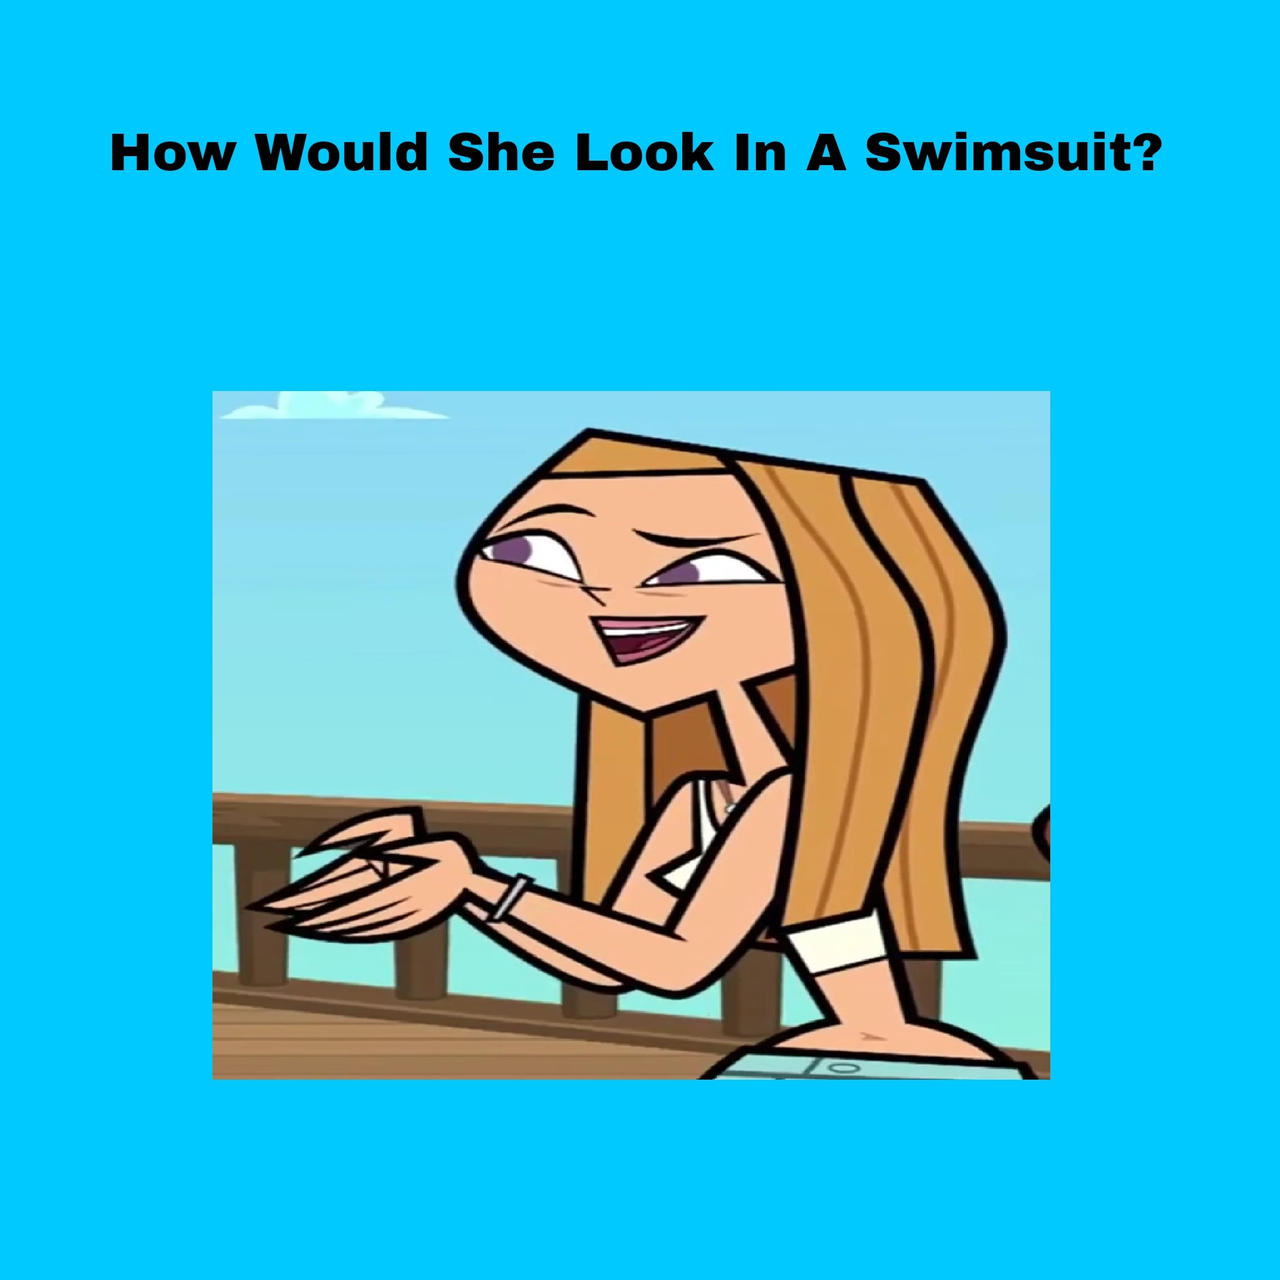 Here's a better look at the swimsuits of the Total Drama Island